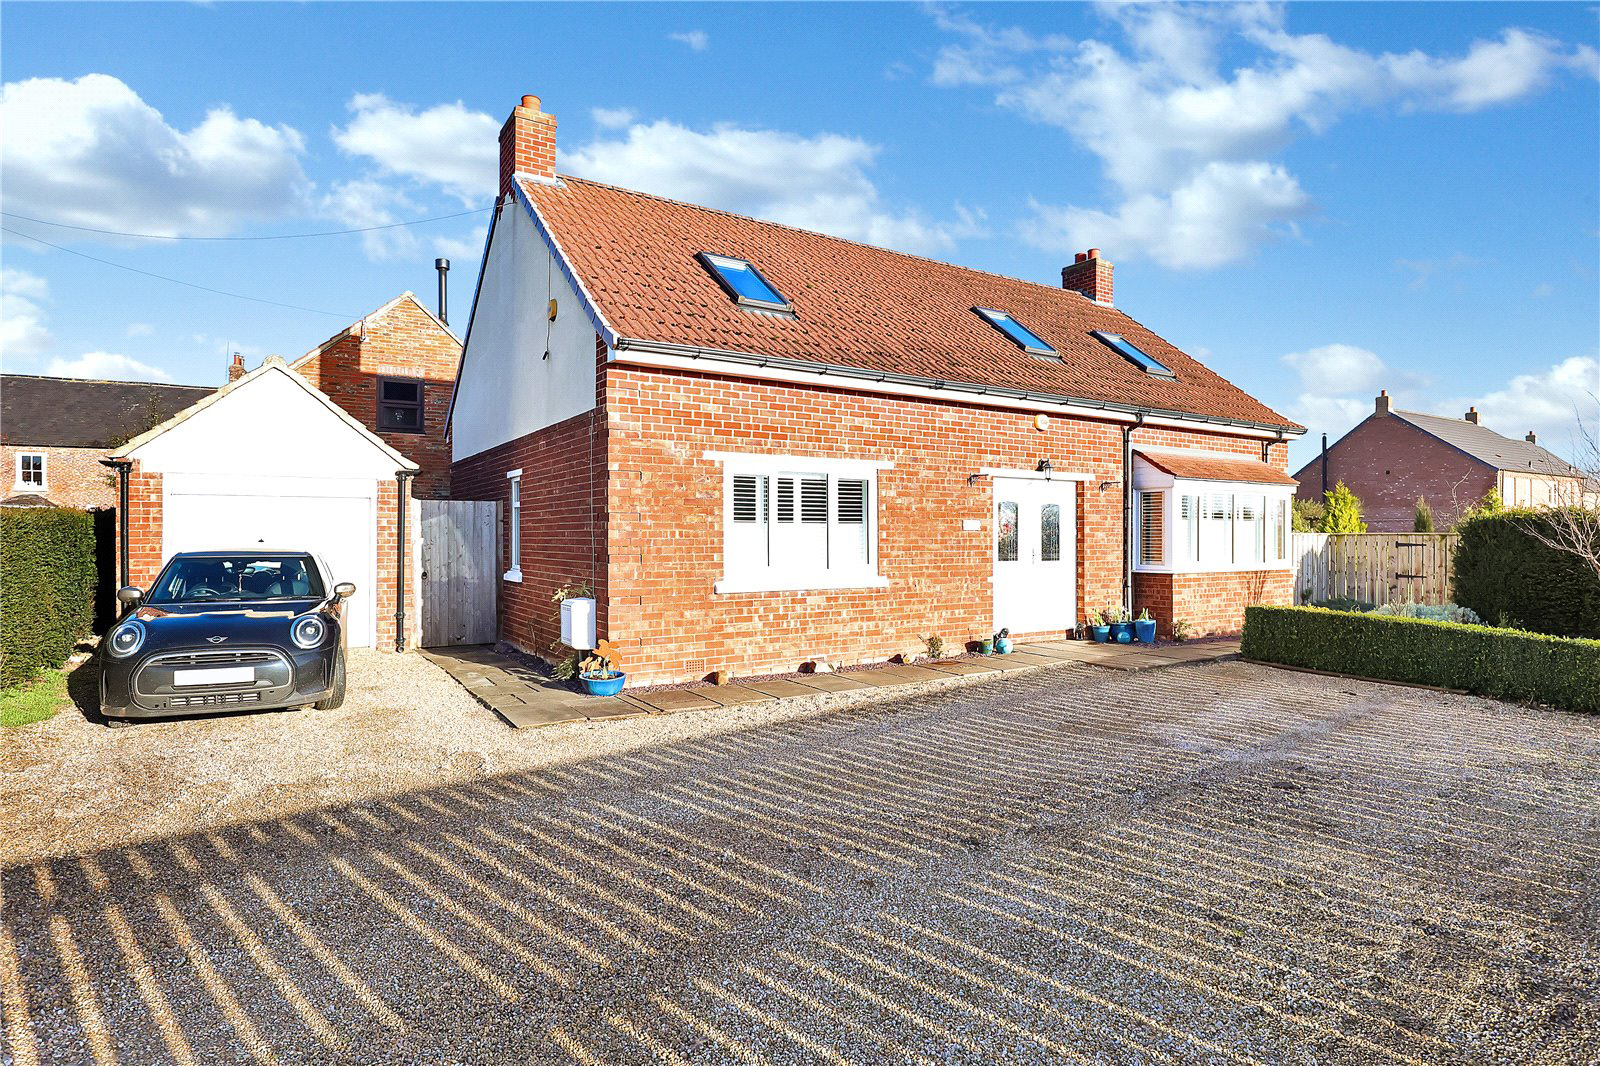 4 bed house for sale in Morton On Swale, Northallerton 1